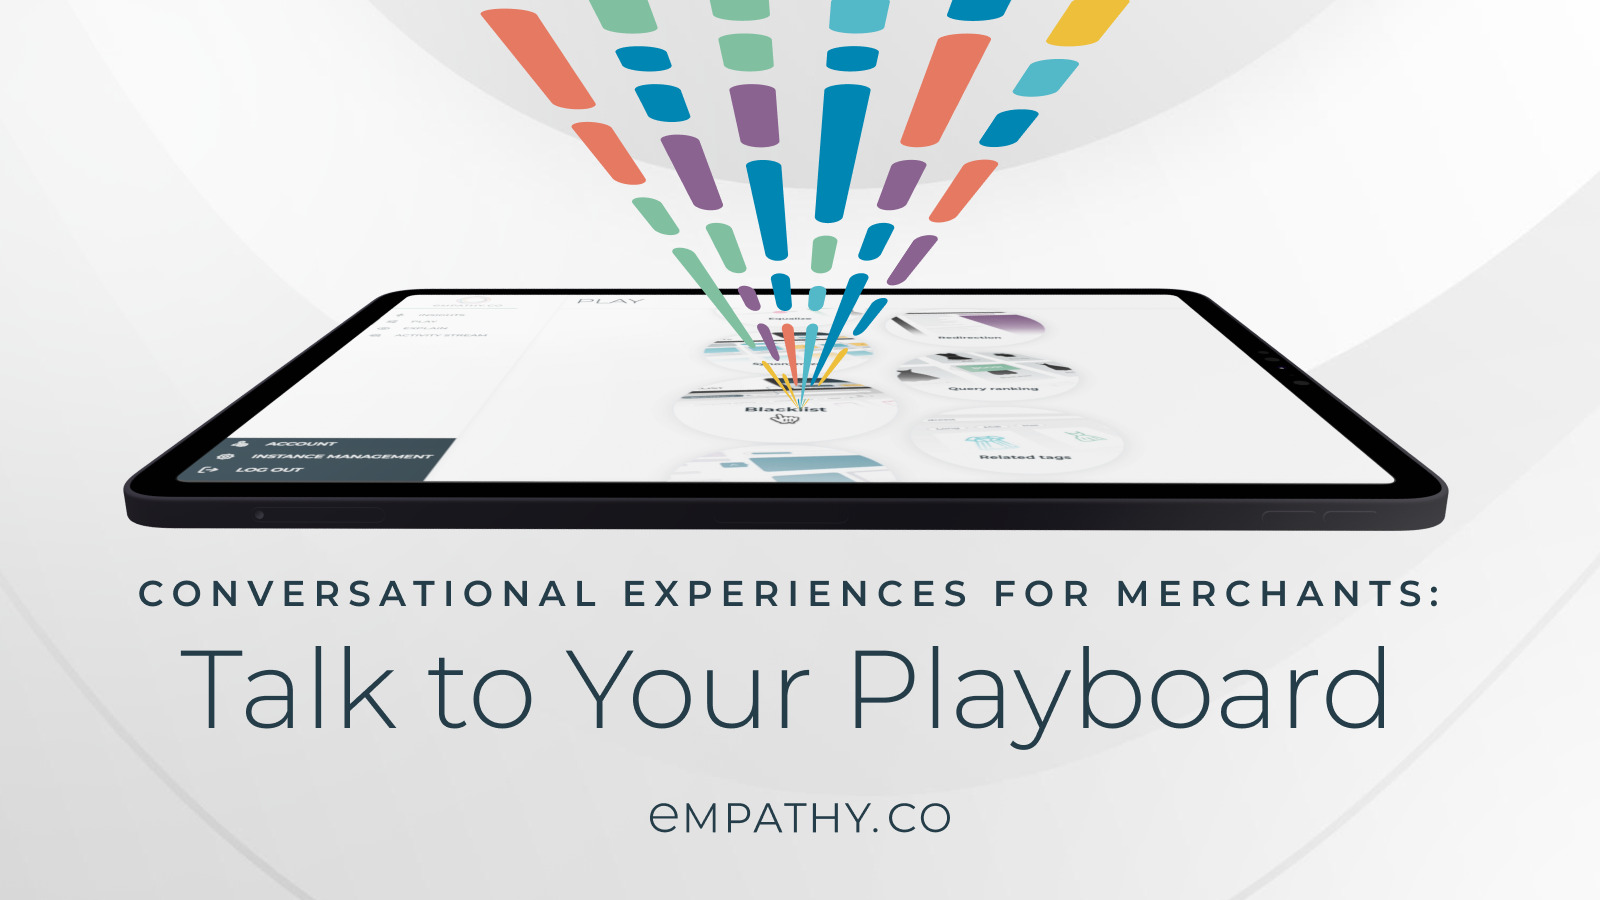 Conversational experiences for merchants: Talk to your Playboard